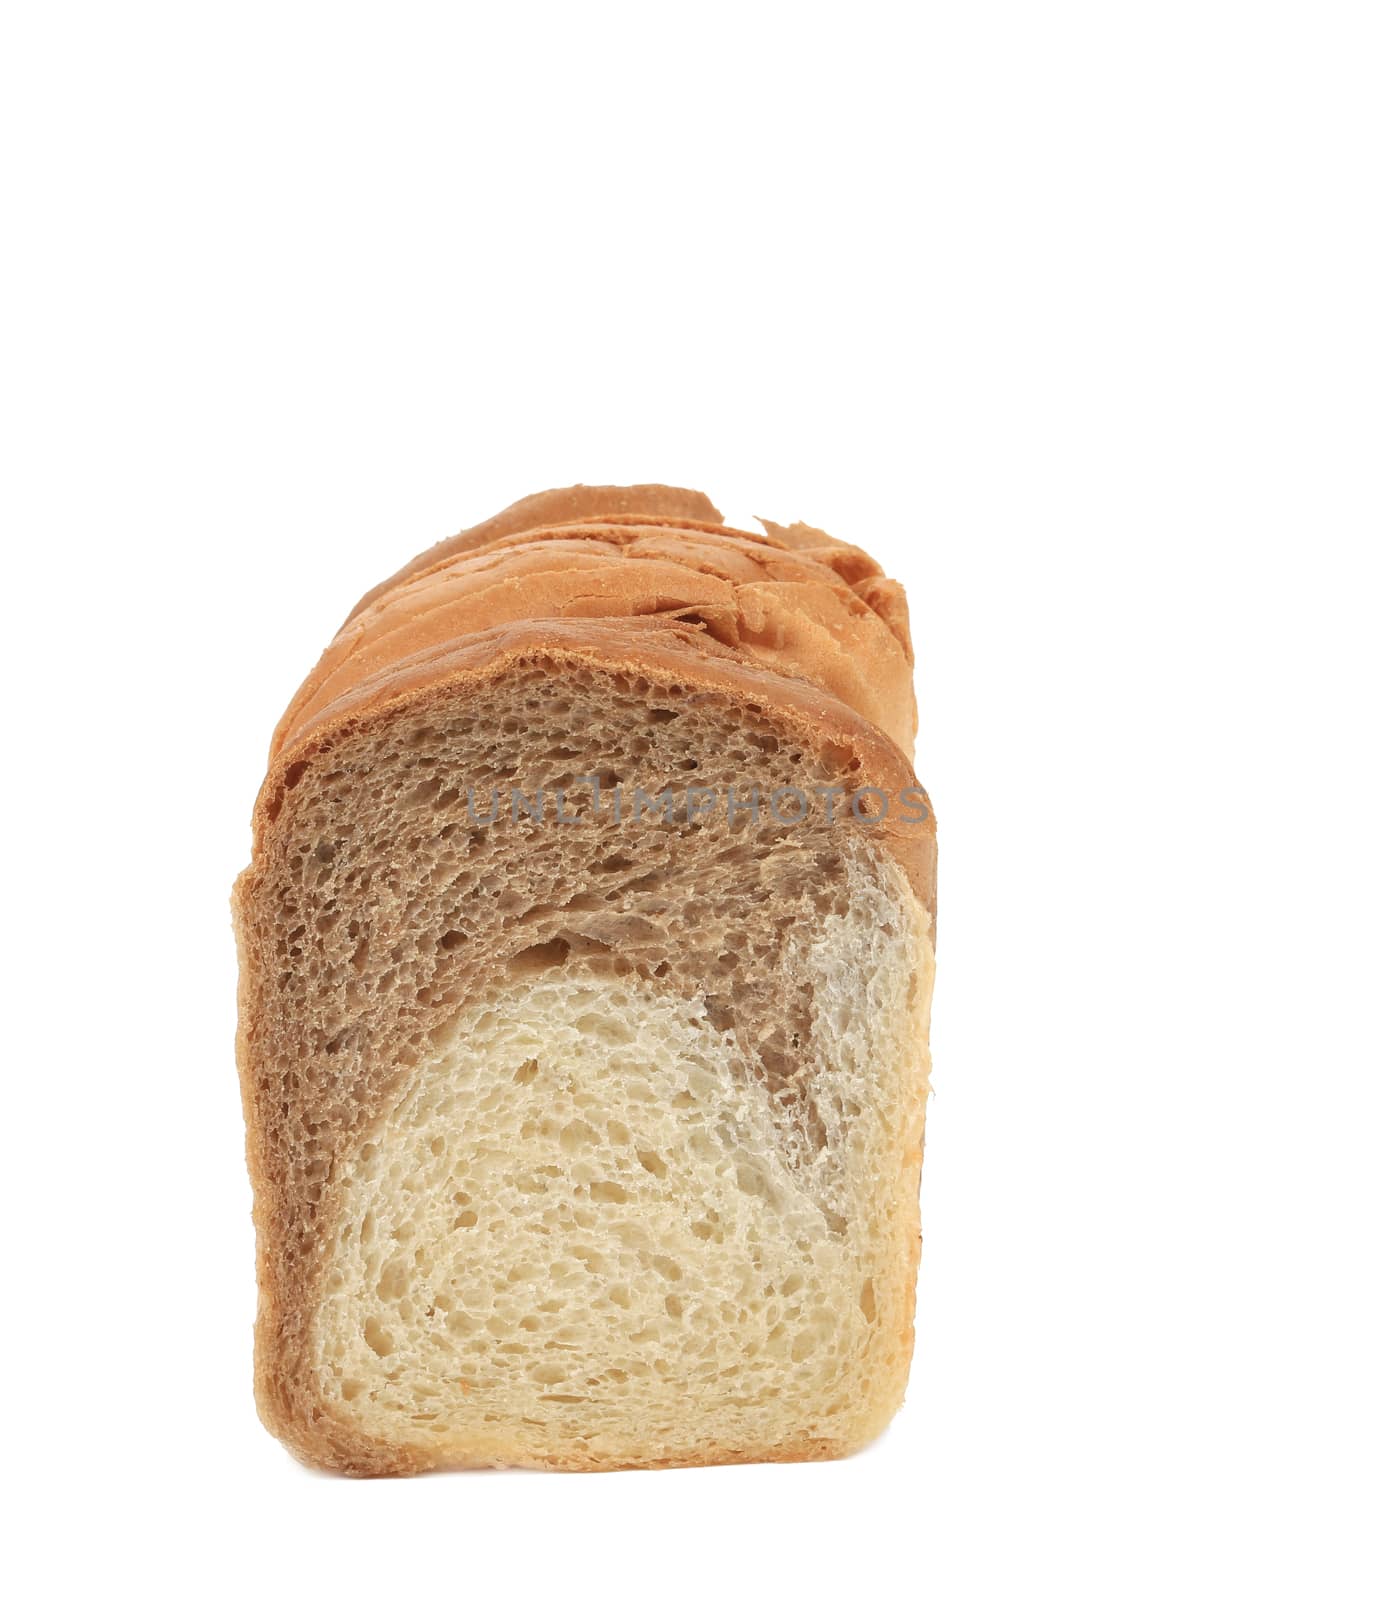 Brown and white bread slice. Isolated on a white background.